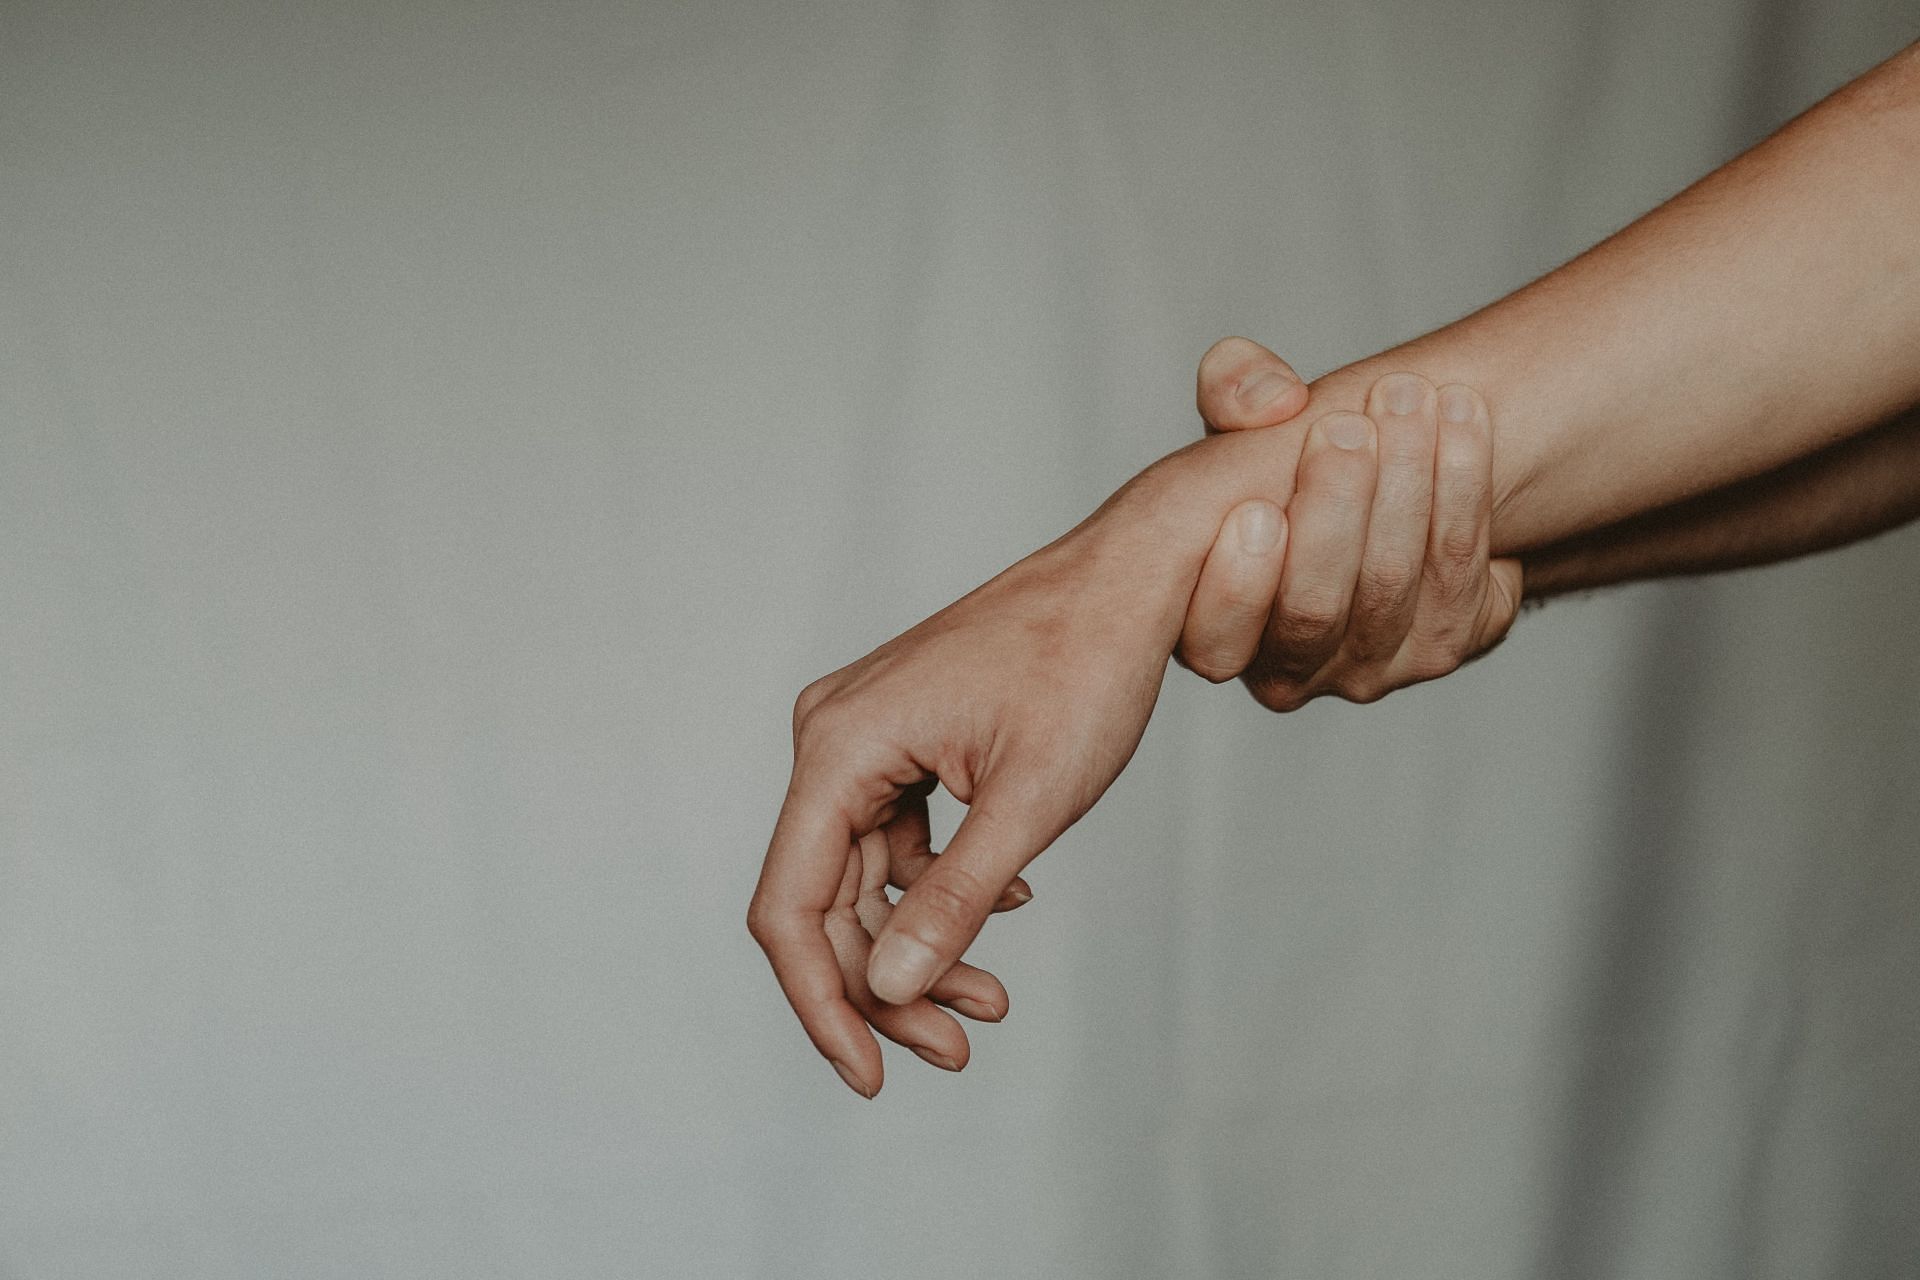 Carpal tunnel syndrome is also a cause of numbness in hands while sleeping. (Image via Pexels/ Anete Lusina)